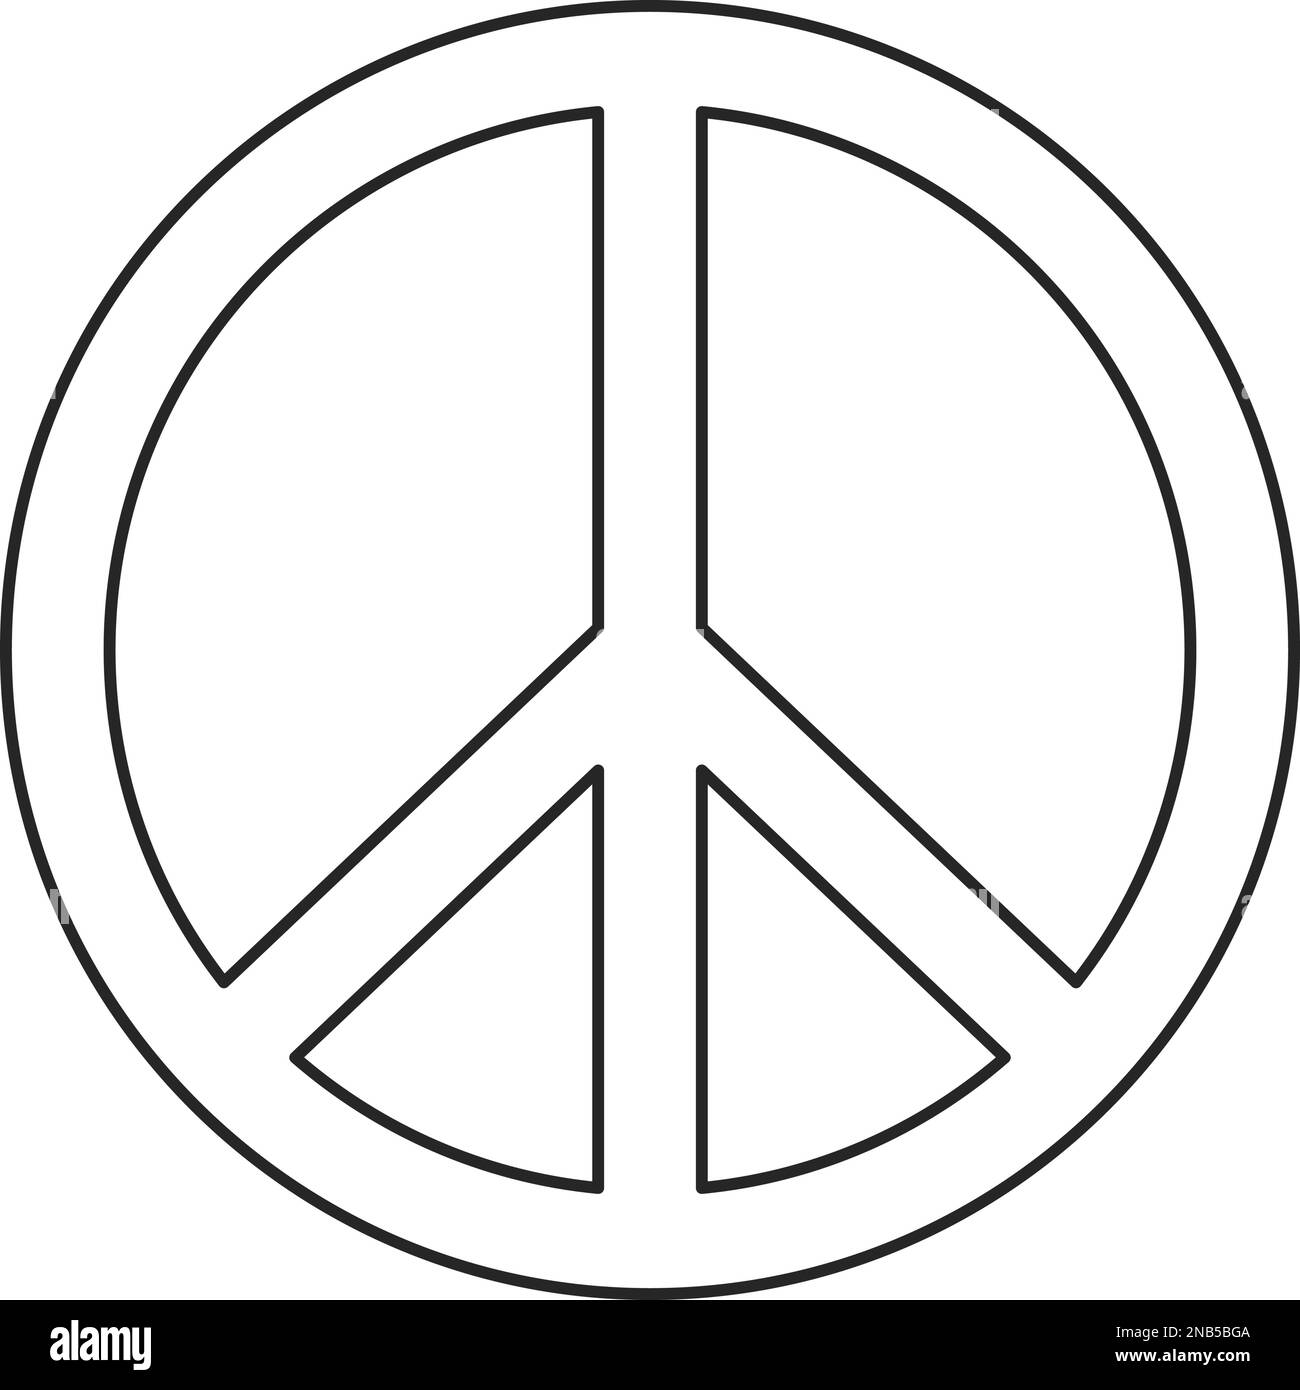 Peace sign in vector icon Stock Vector